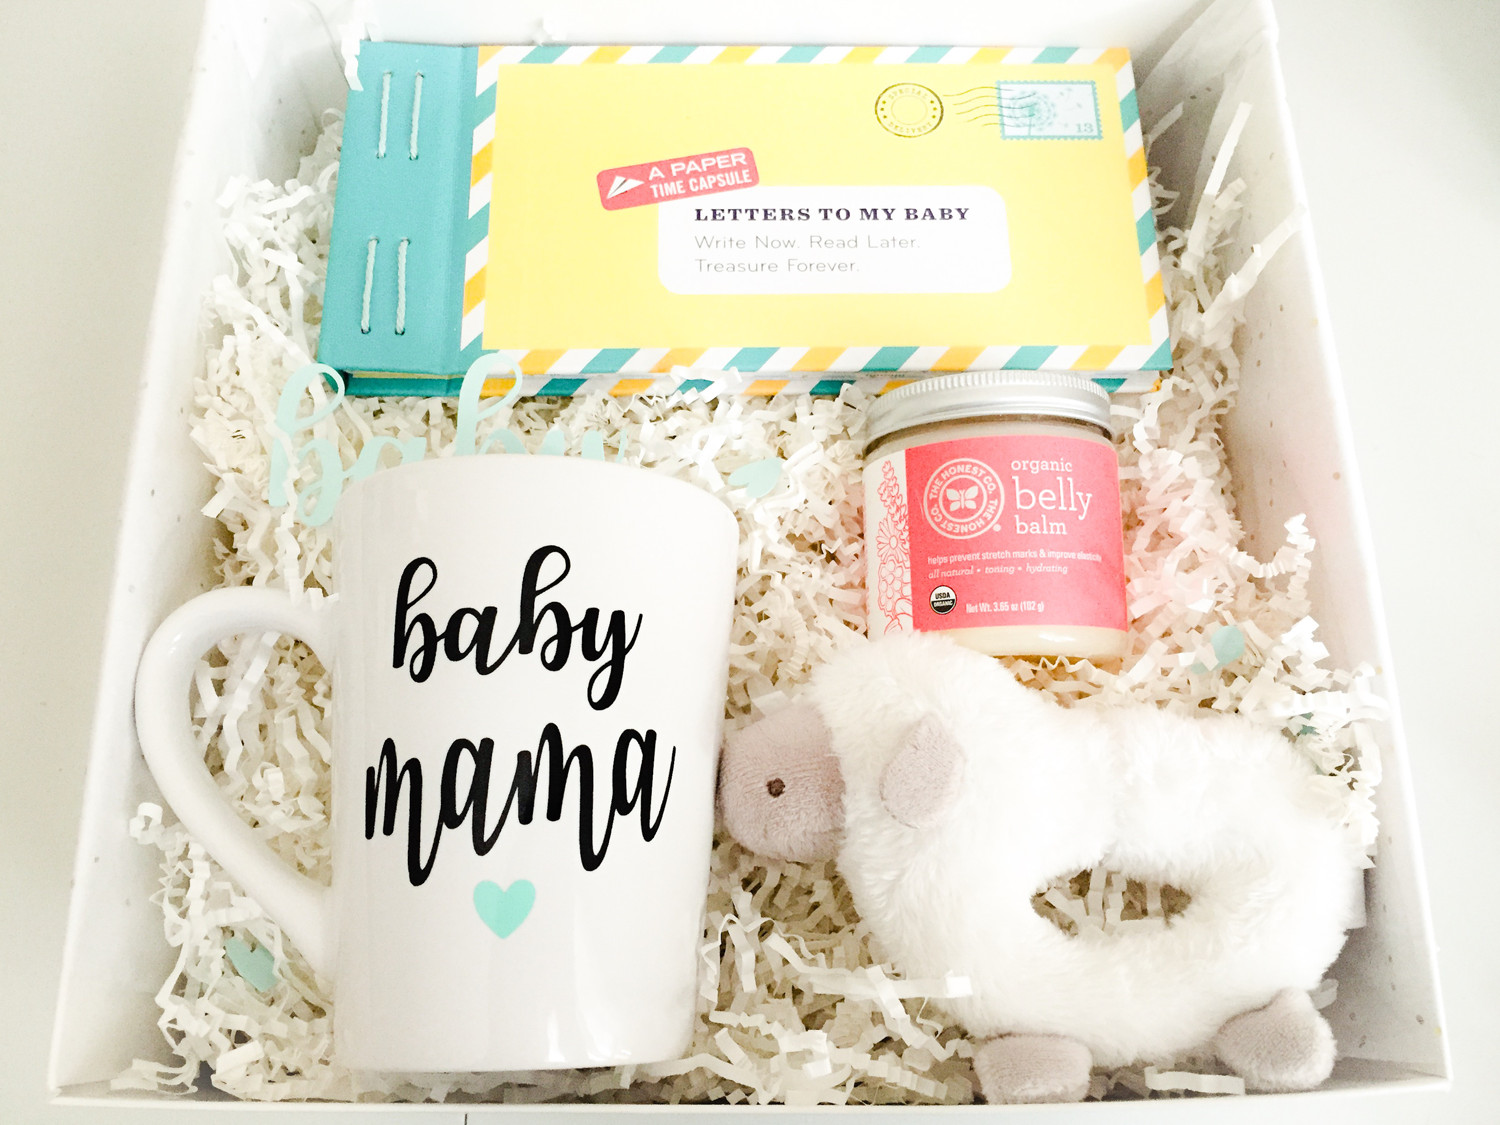 Gift Ideas For An Expecting Mother
 She’s Having a Baby No 1 Mom To Be Gift Sets